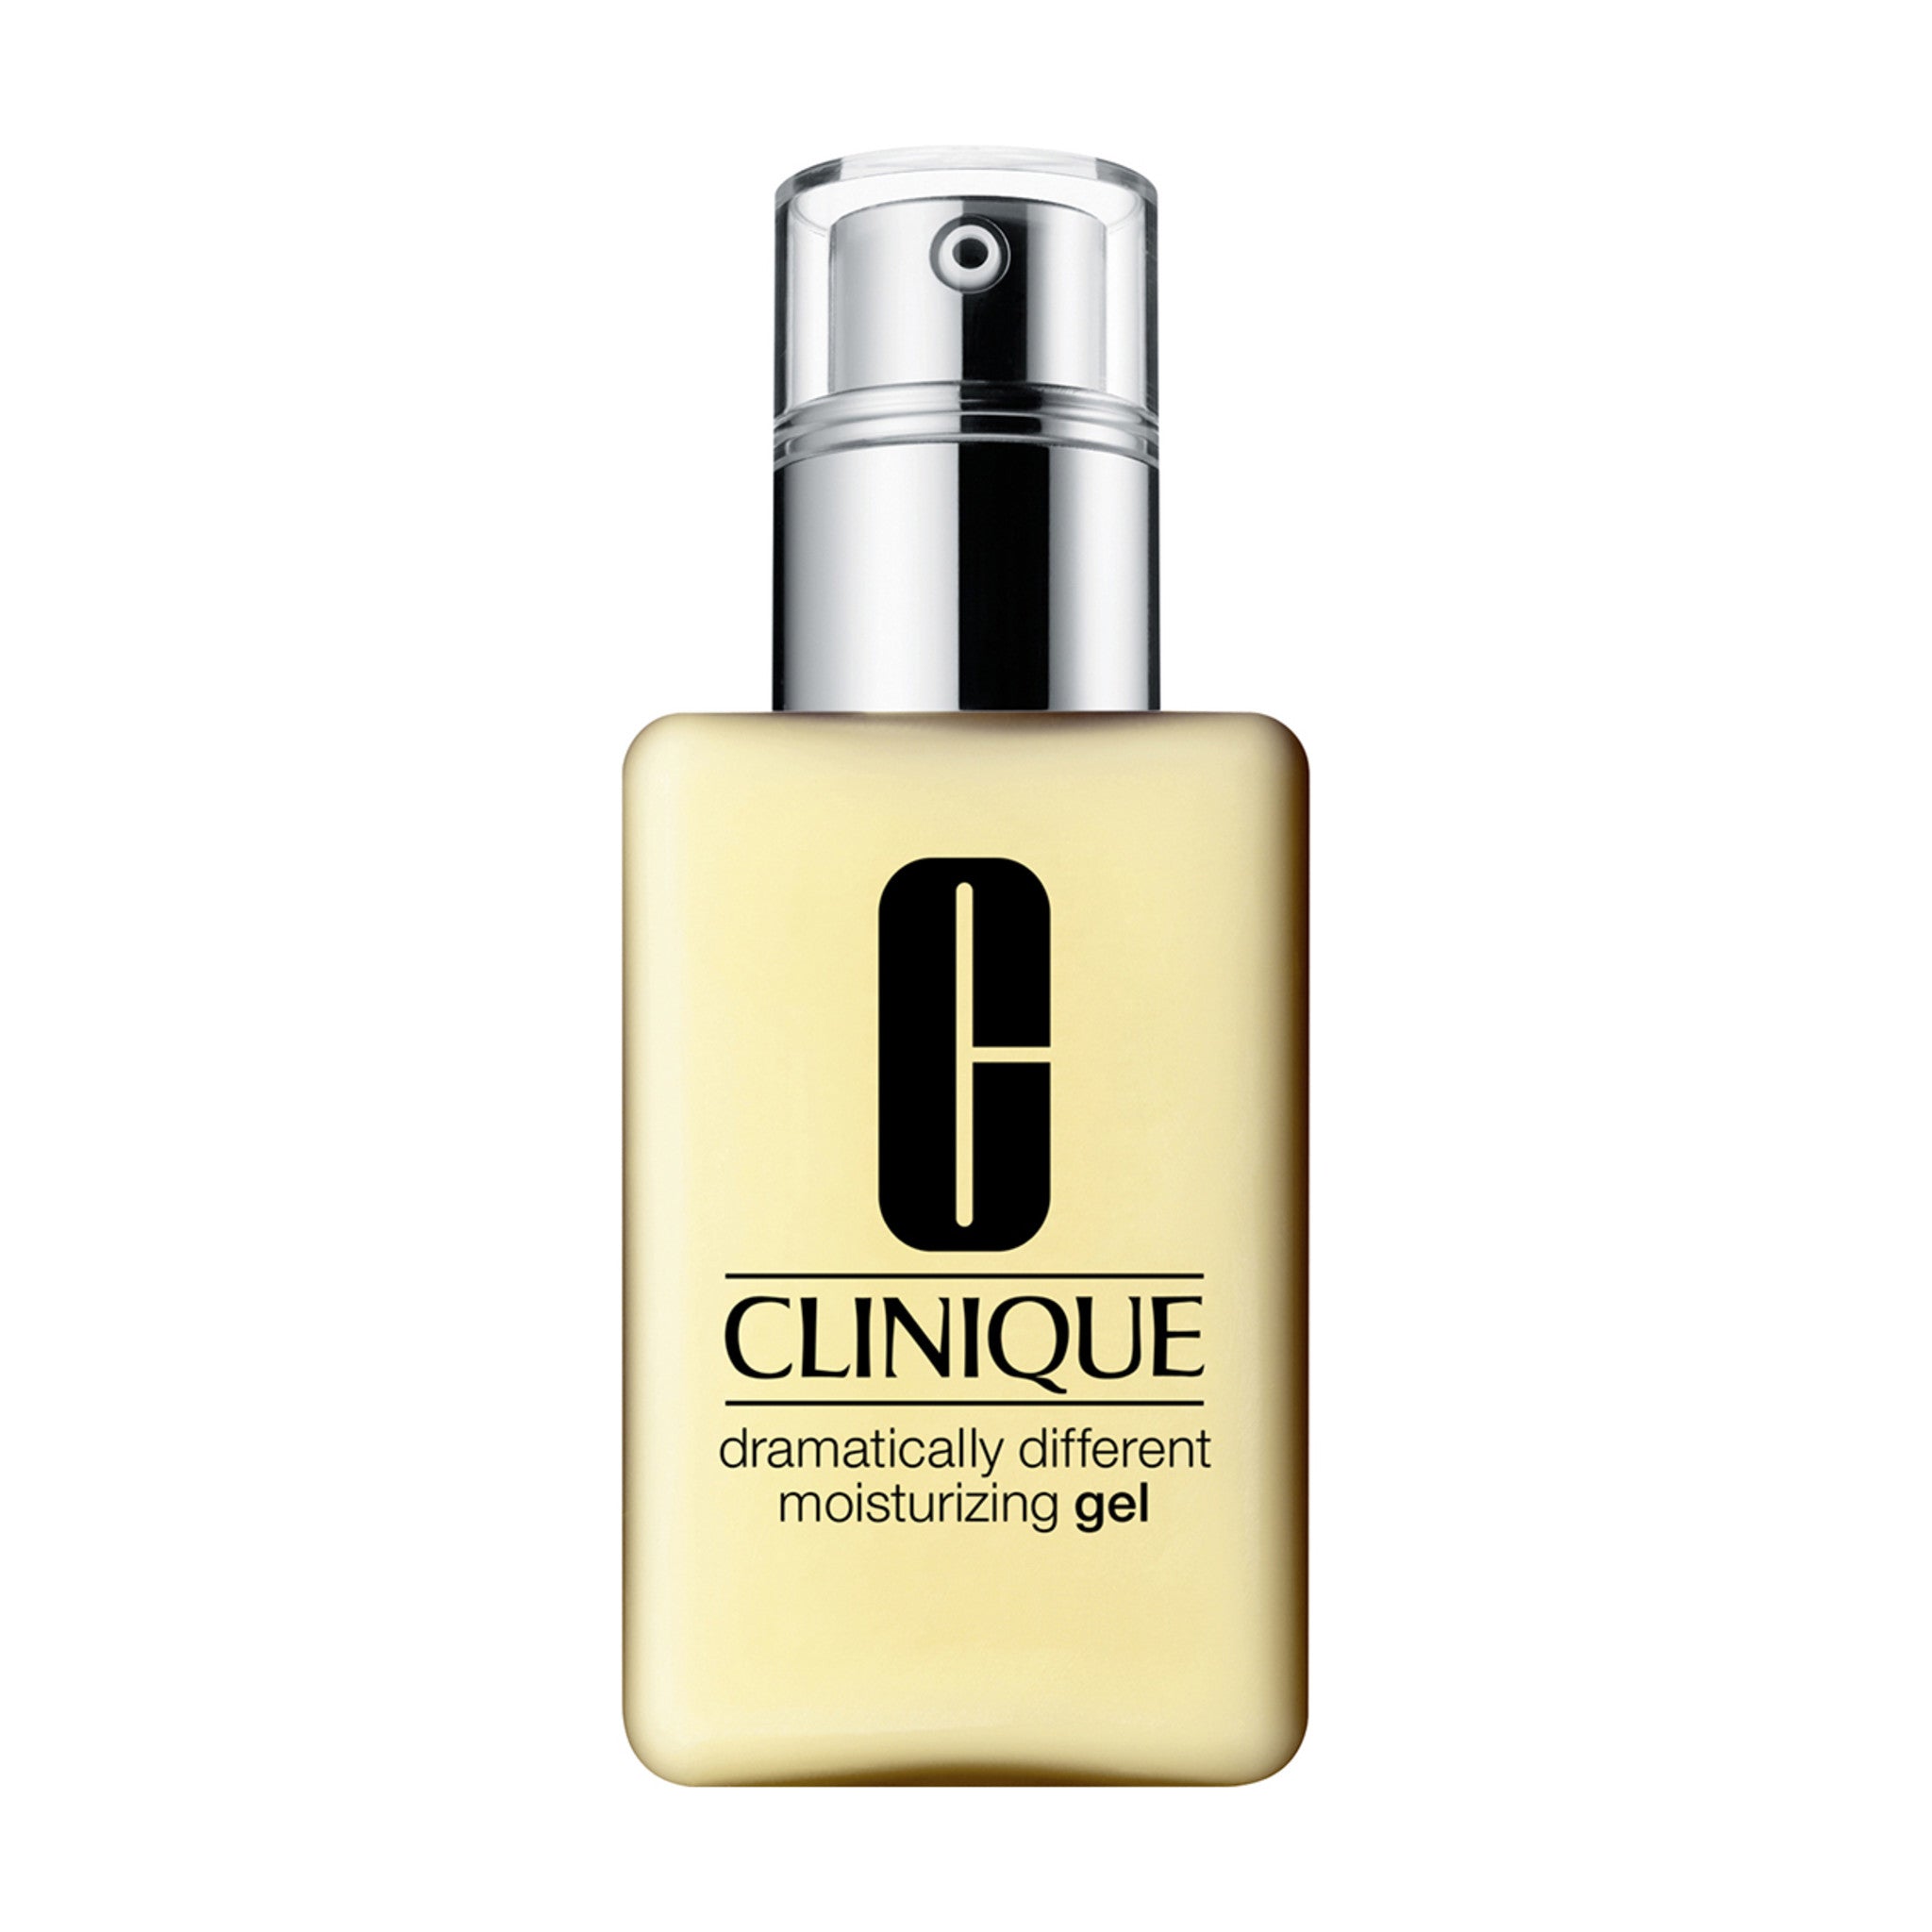 Clinique Dramatically Different Moisturizing Gel Size variant: 4.2 OZ main image.